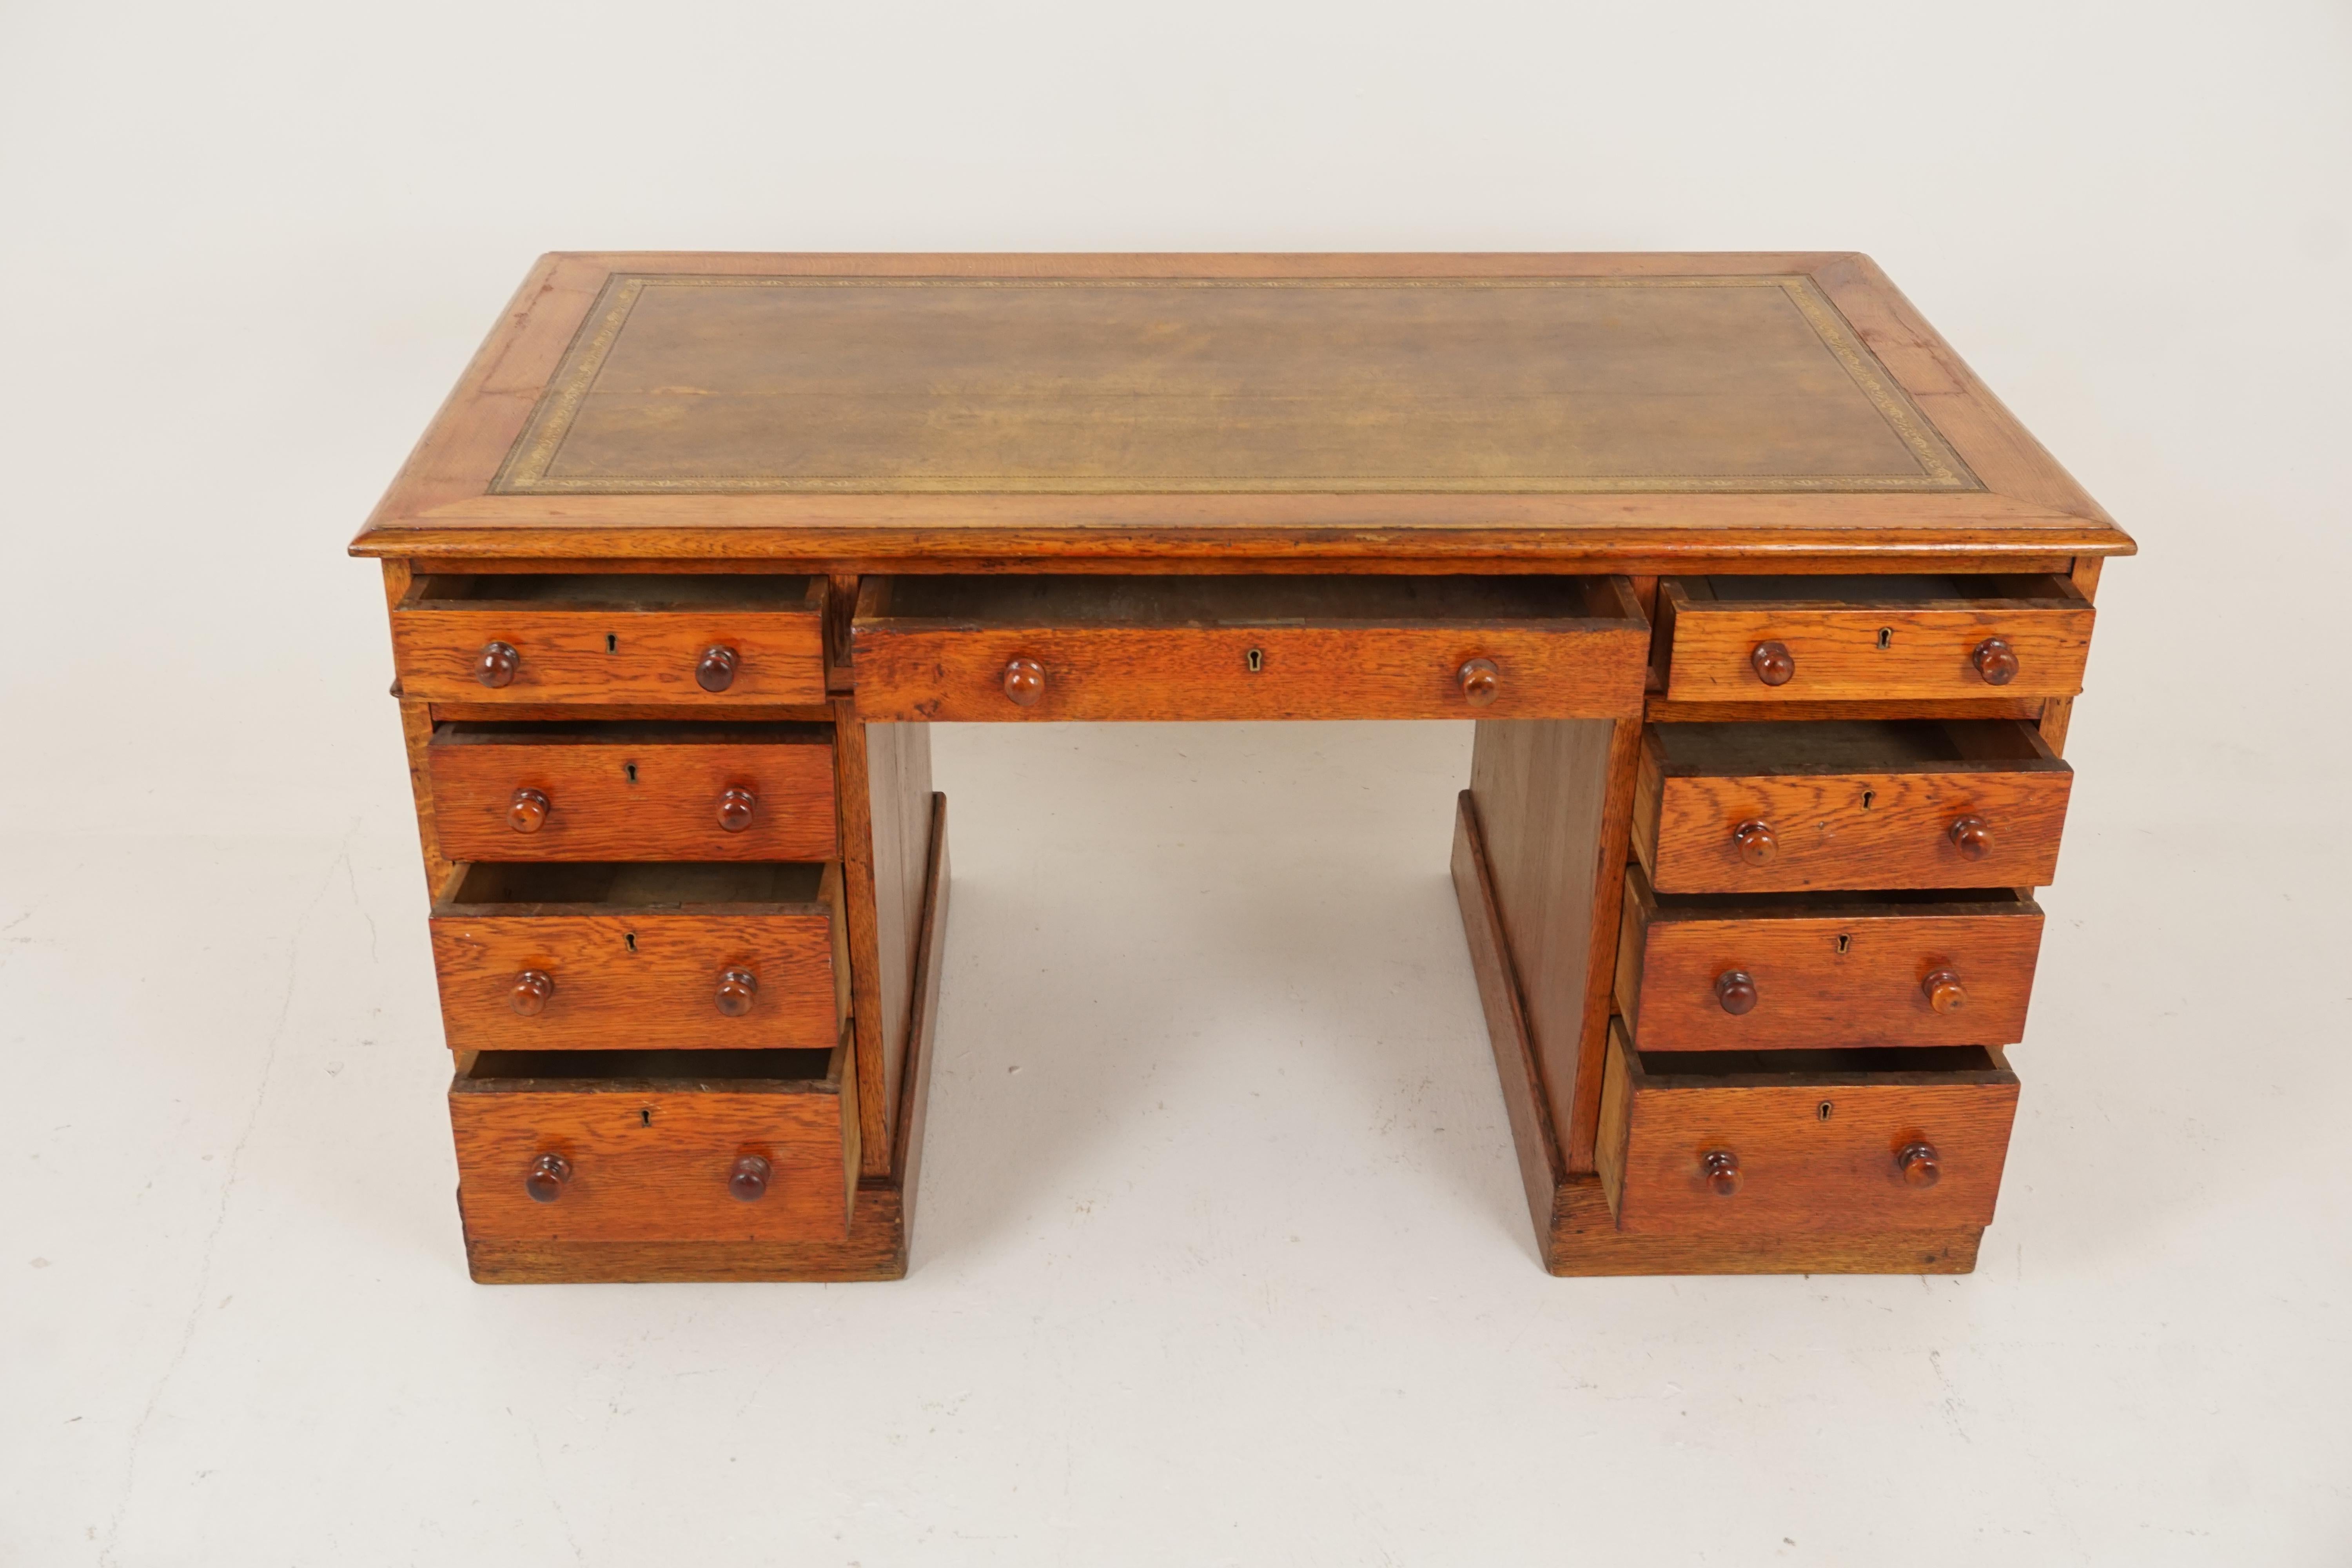 Antique early Victorian oak double pedestal desk, Scotland 1880, B2476

Scotland 1880
Solid oak and veneer
Original finish
Rectangular moulded top
Having an inset leather writing surface decorated with gold tooling
Below are half width drawers each